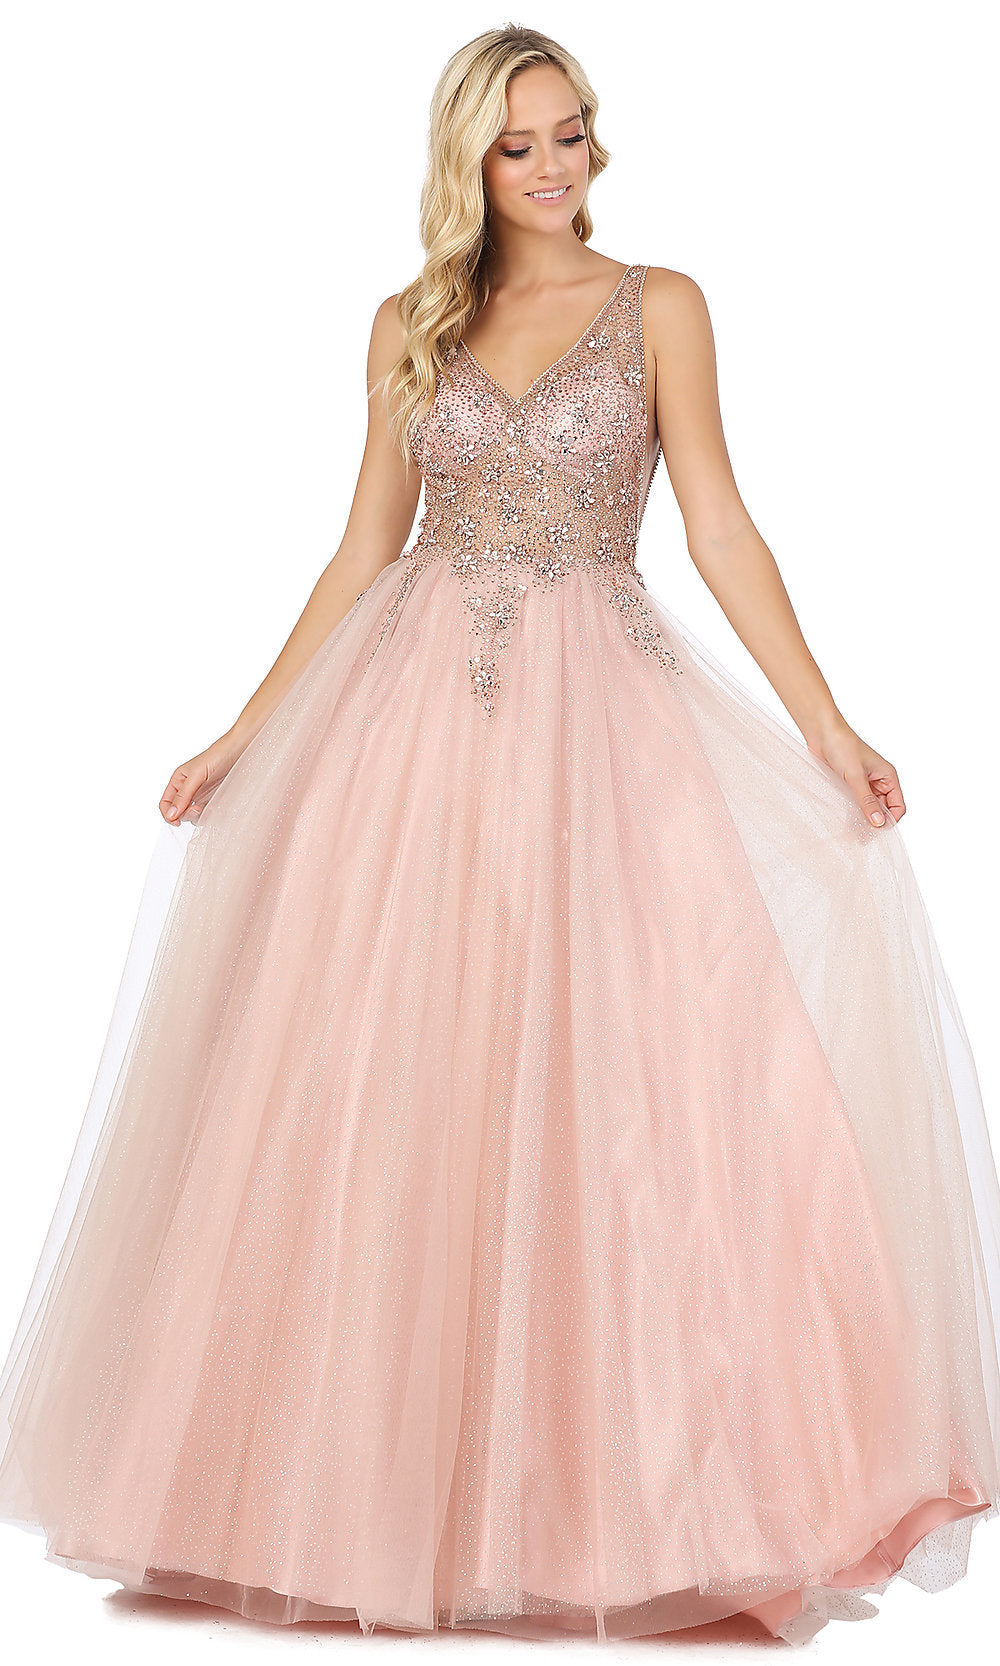 Rose Gold Ball-Gown-Style Beaded-Bodice Formal Prom Dress